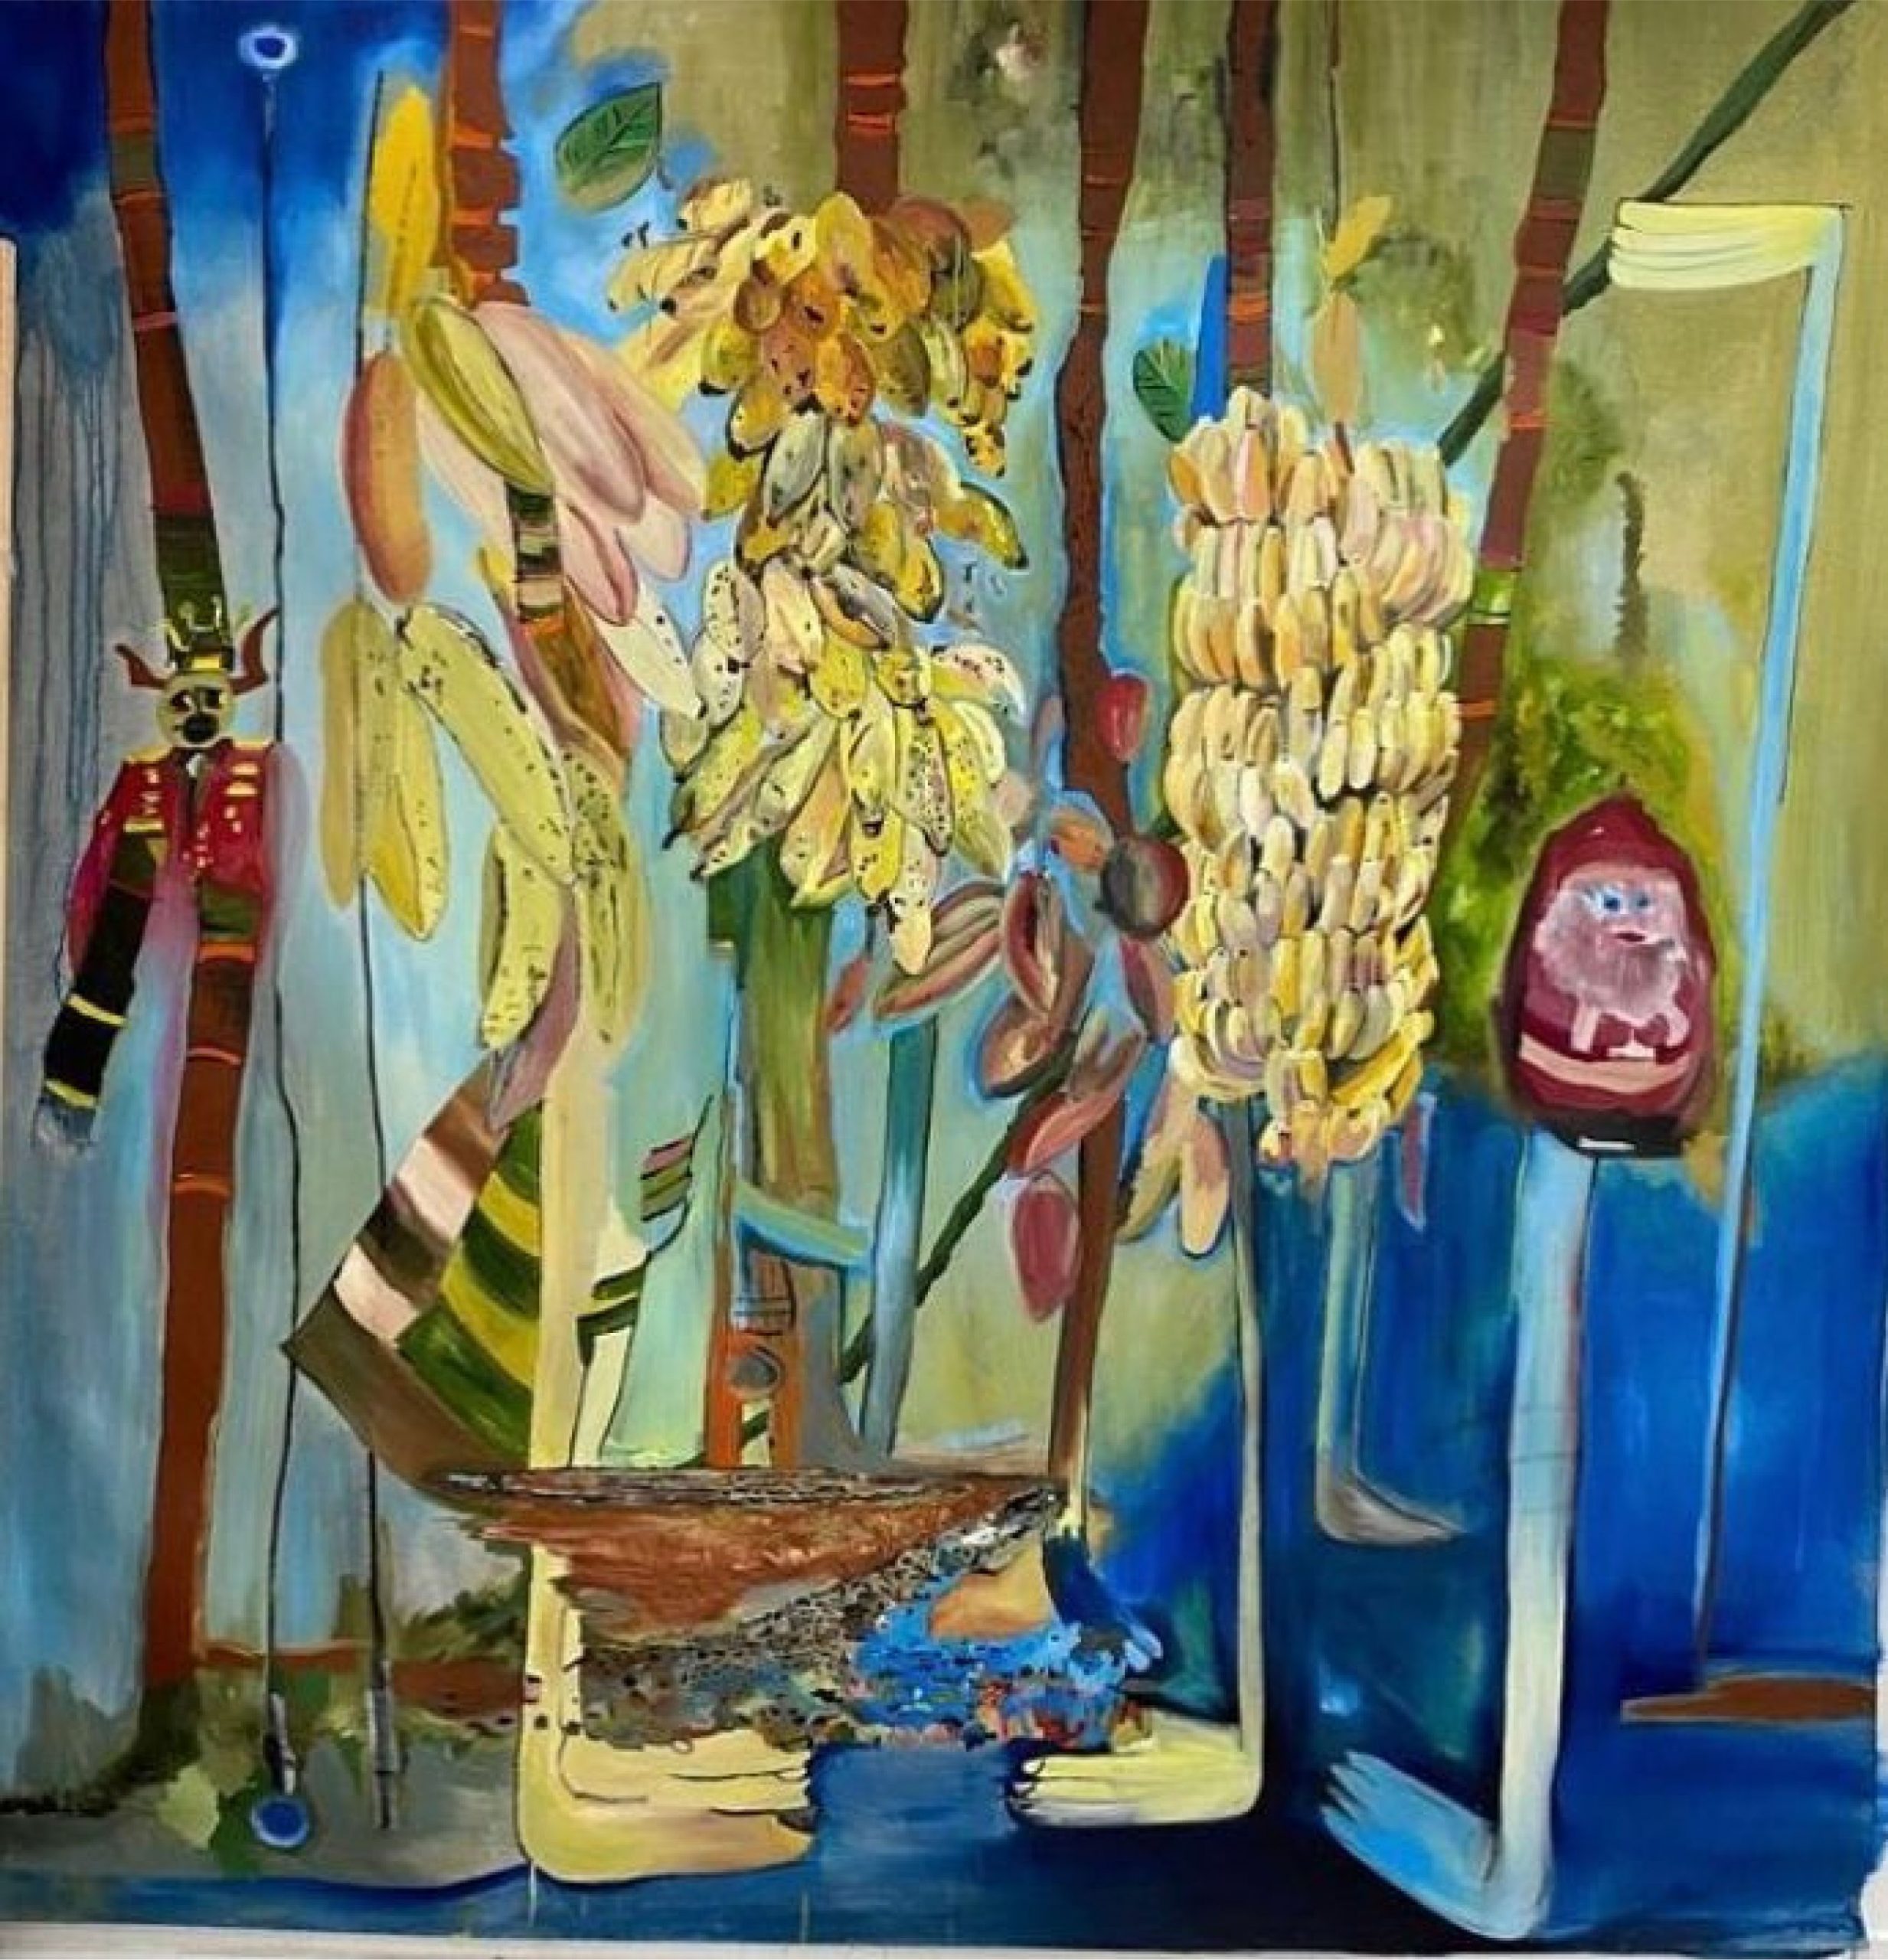 The Jungle, 2021  - Oil on canvas 82.5 x 81.7 in (209.5 x 207.5 cm)